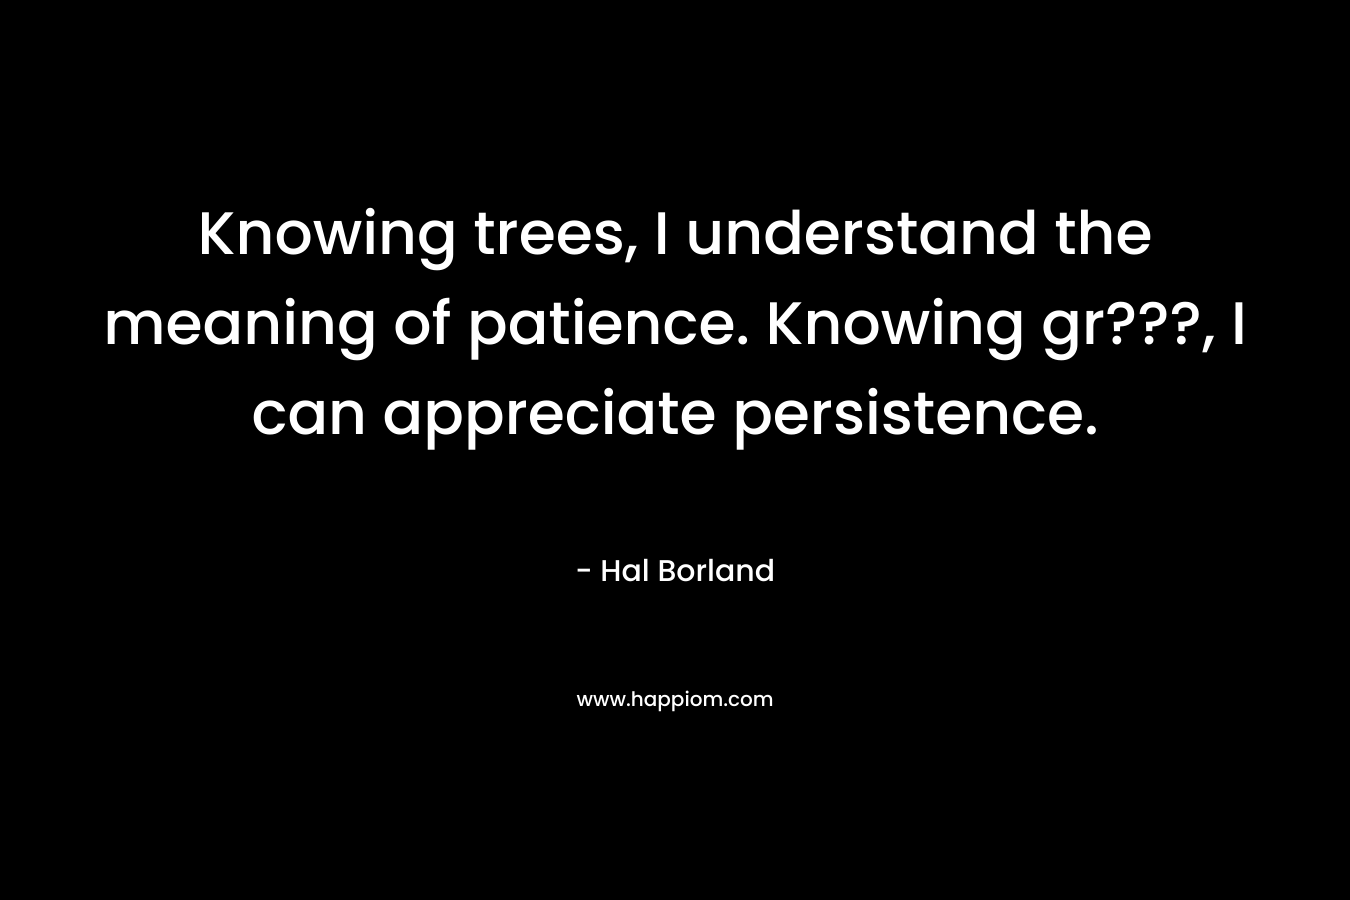 Knowing trees, I understand the meaning of patience. Knowing gr???, I can appreciate persistence.